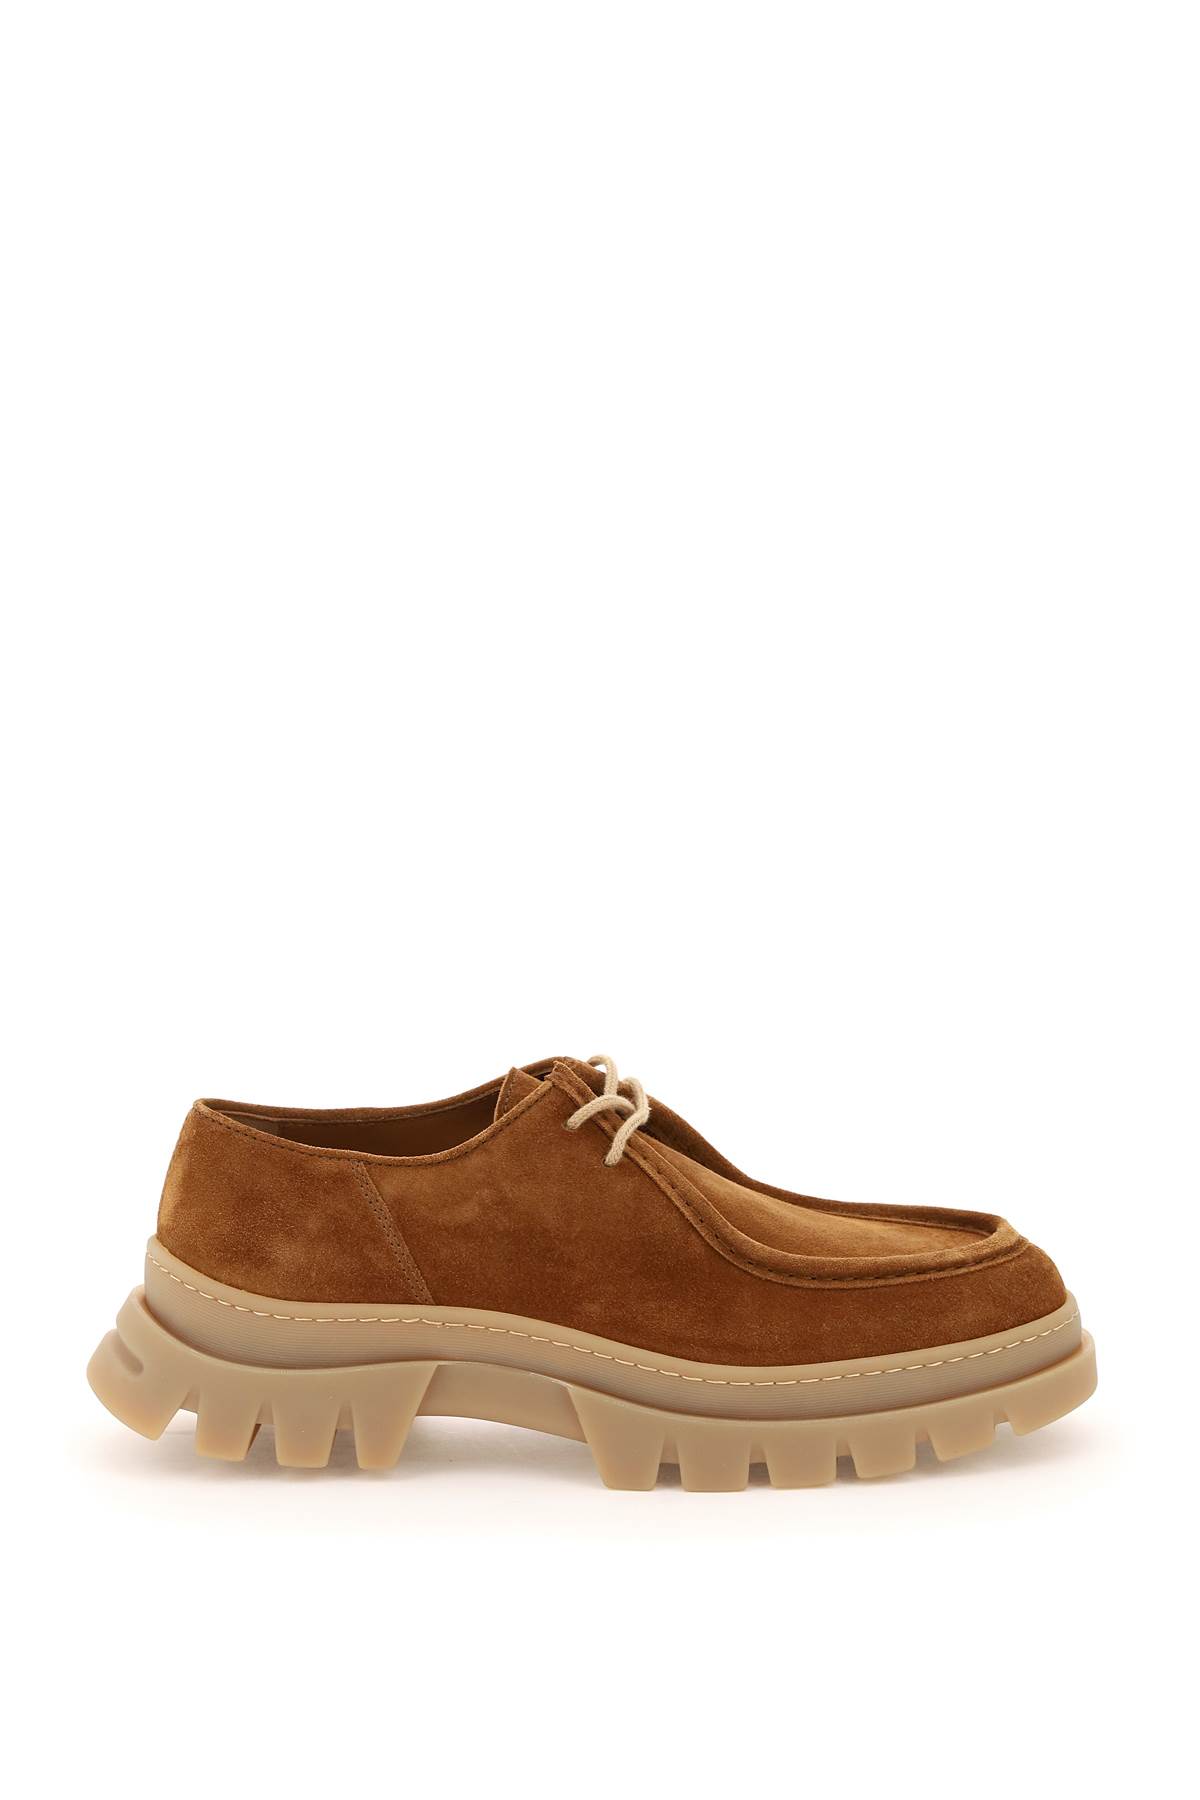 Henderson Baracco Suede Leather Lace-up Shoes